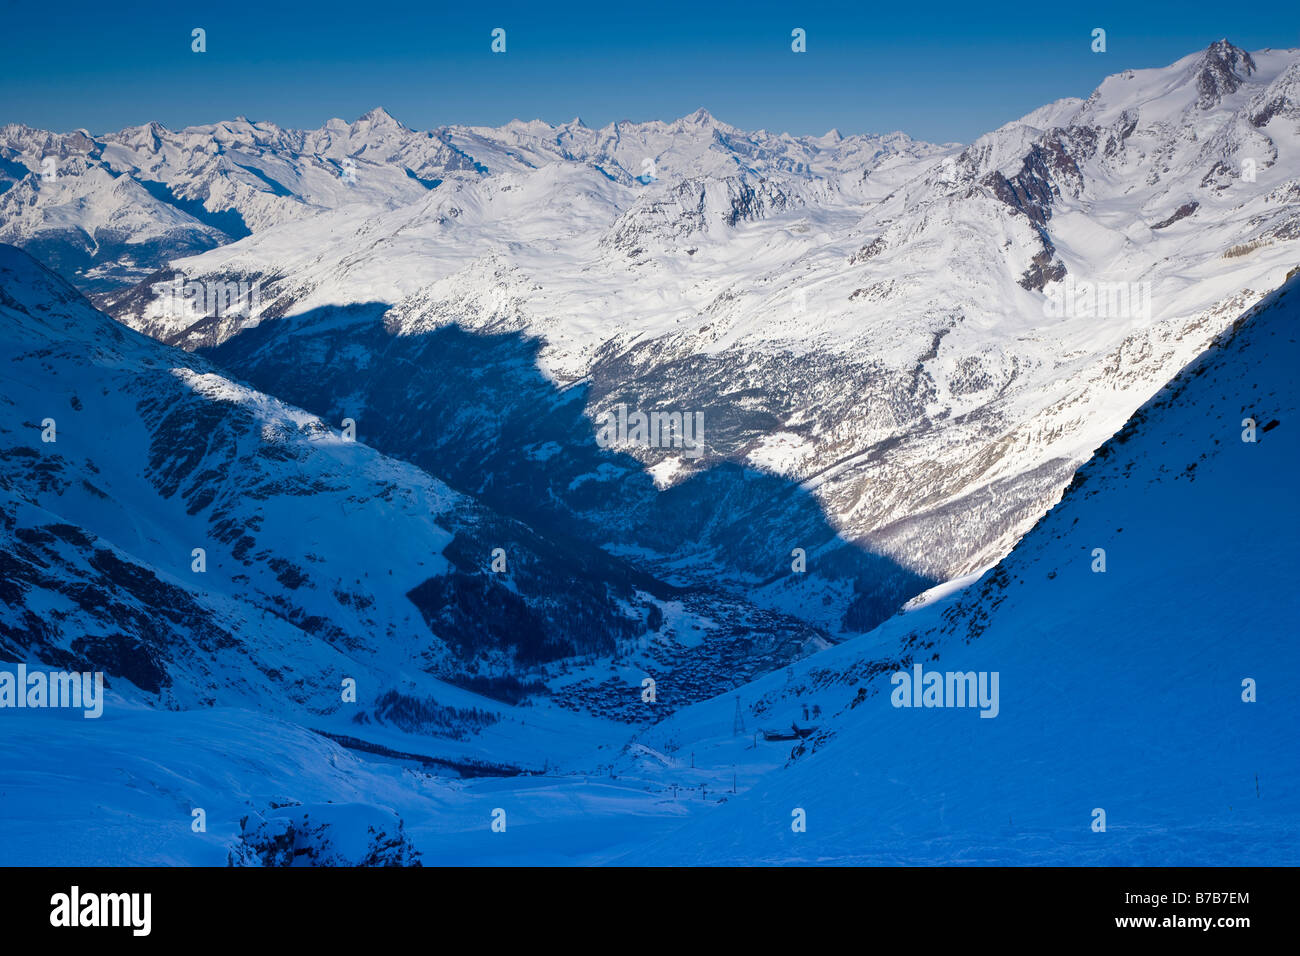 Saas Fee deep in the Saas Valley surrounded by mountains Switzerland Stock Photo